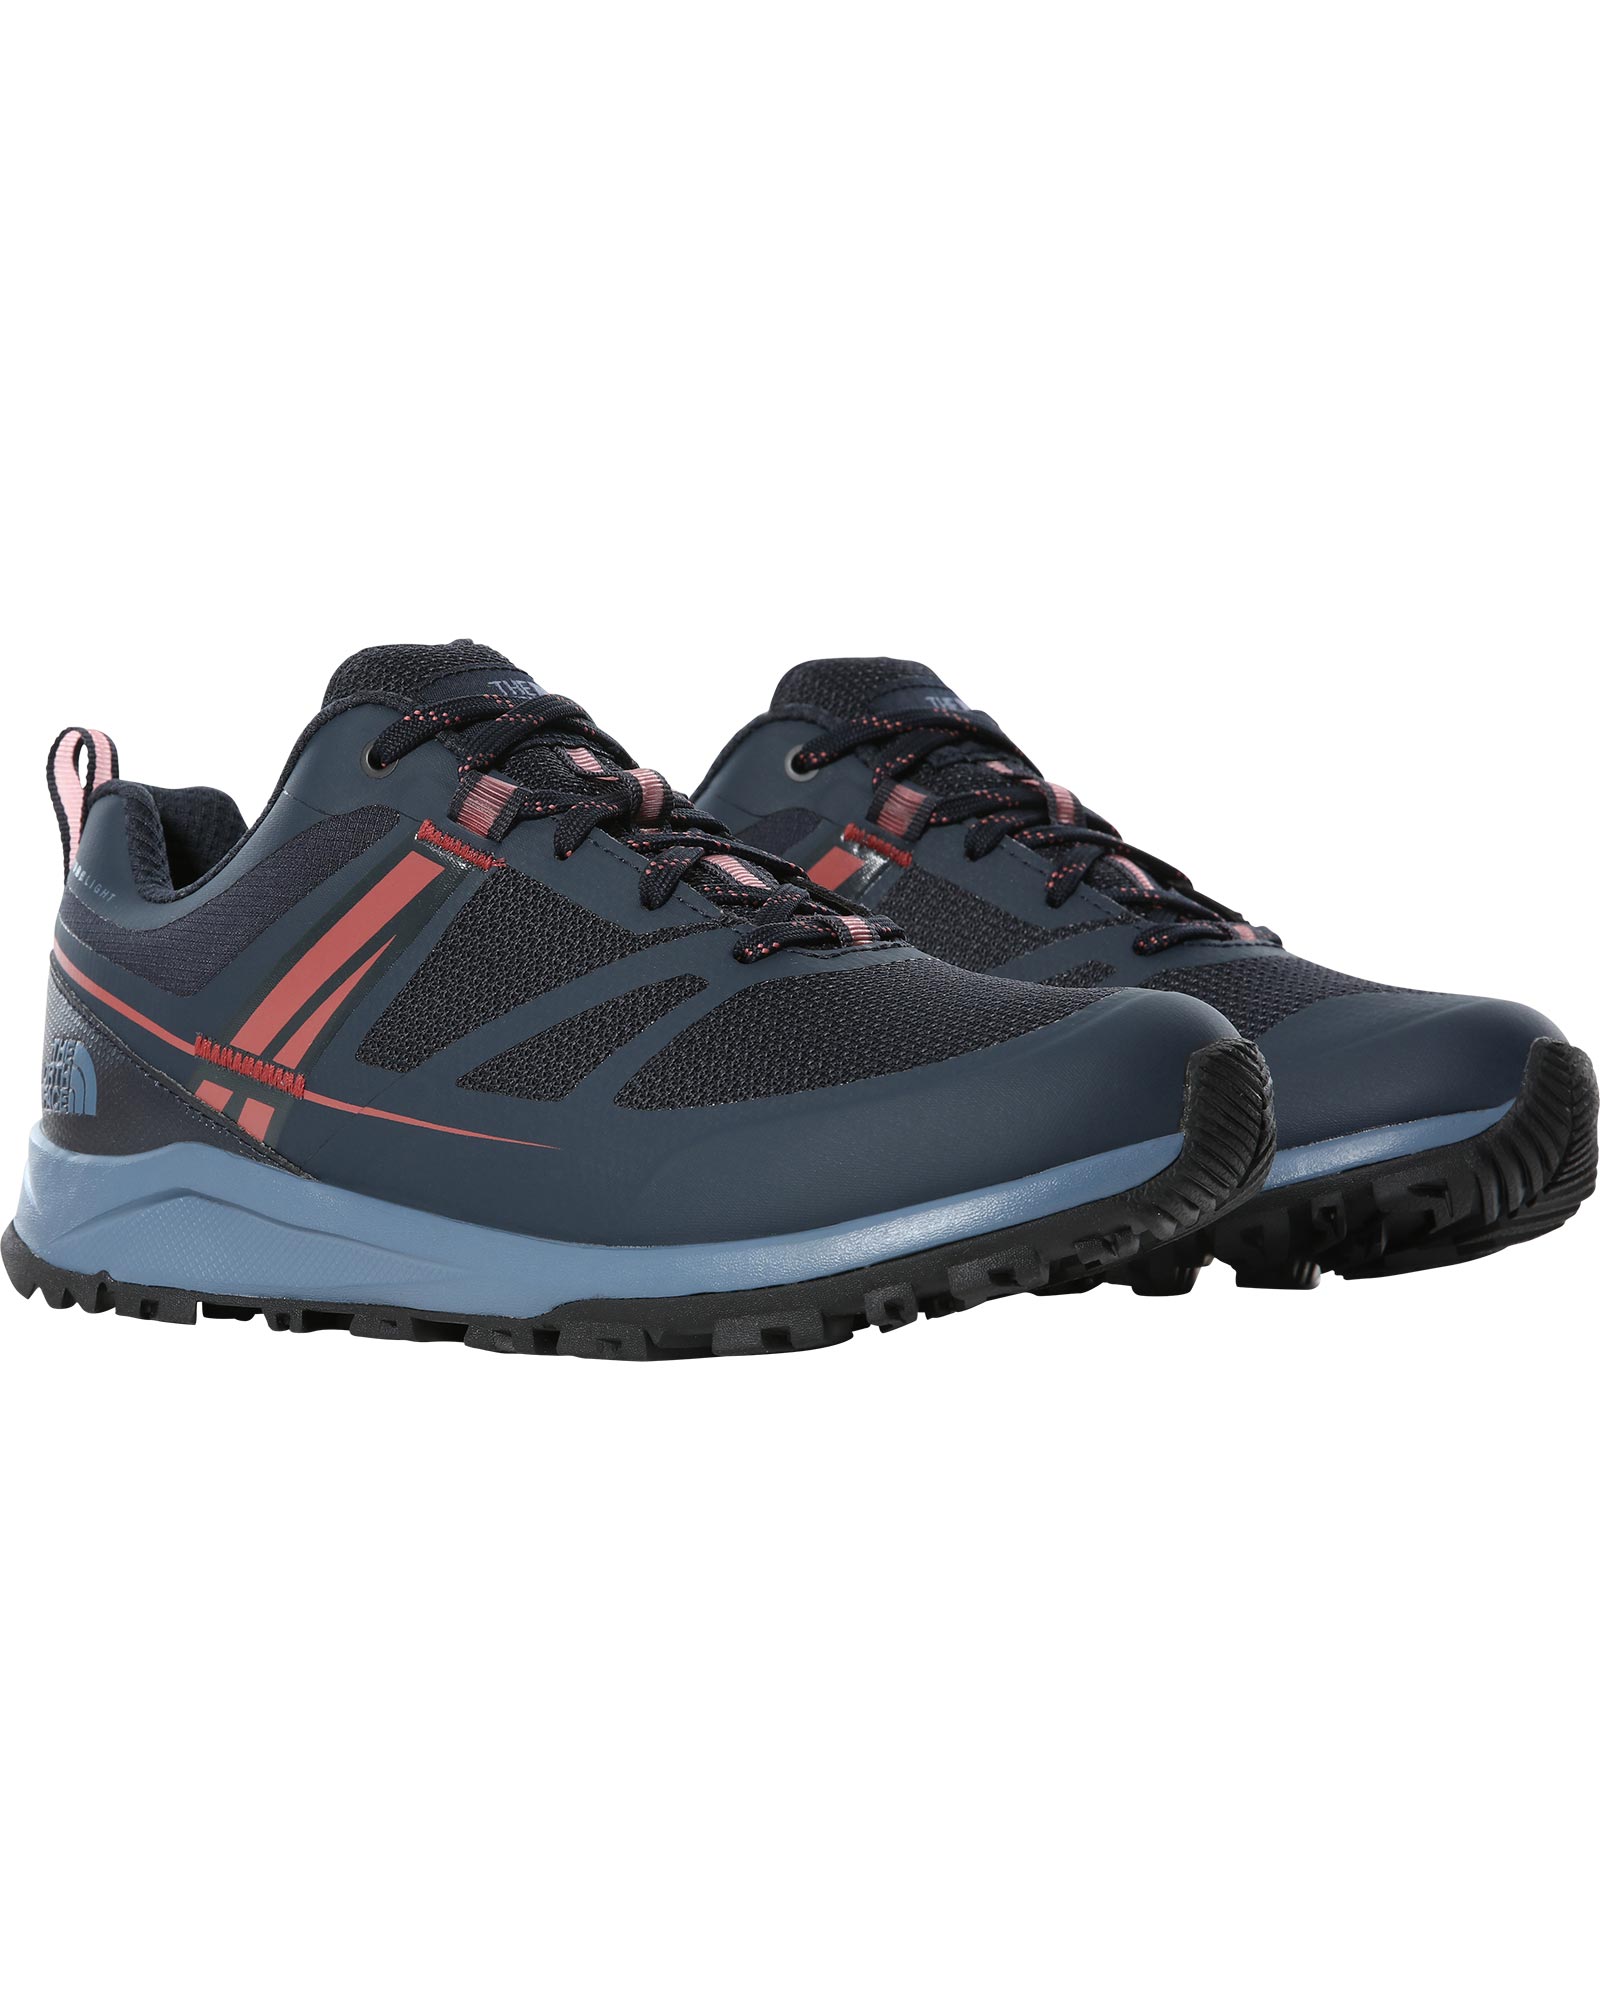 Product image of The North Face Litewave FUTUReLIGHT Women's Shoes